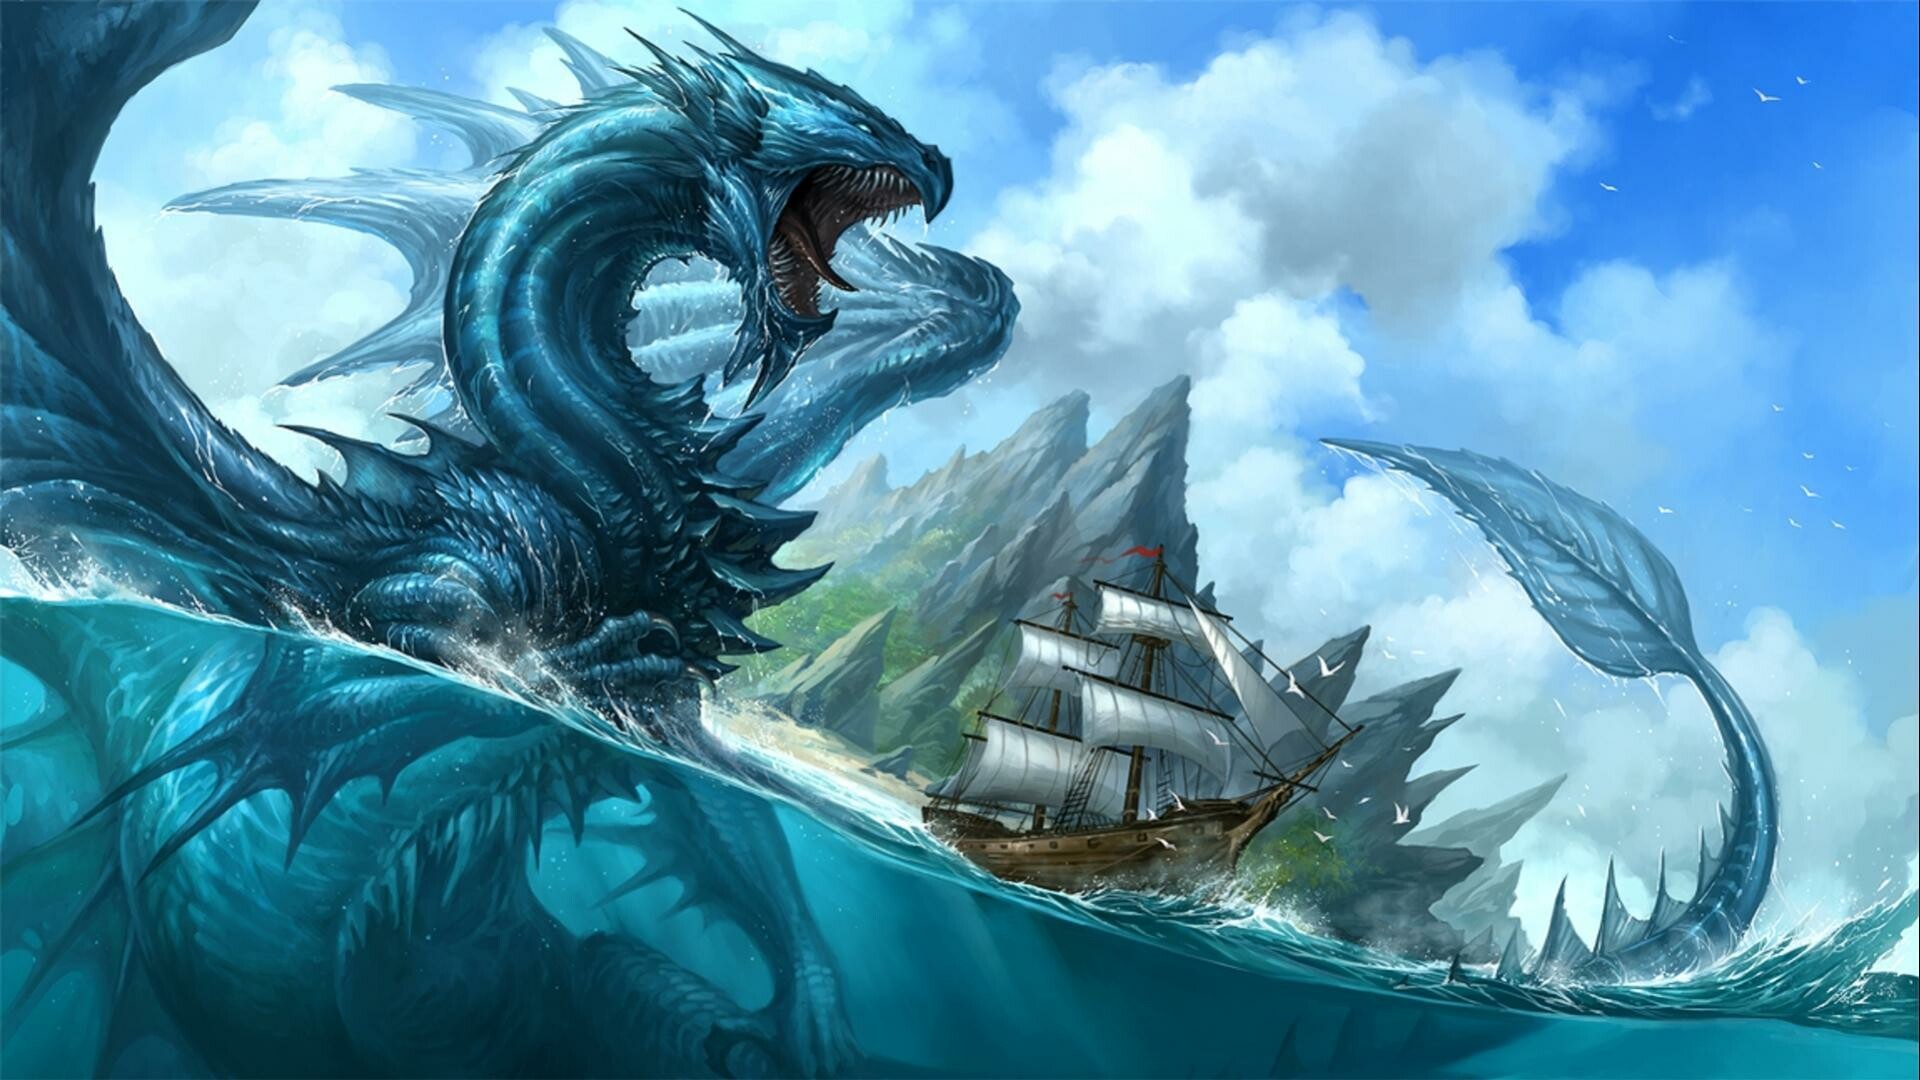 Dragon: A reptilian legendary creature living in the ocean, Folklore. 1920x1080 Full HD Background.